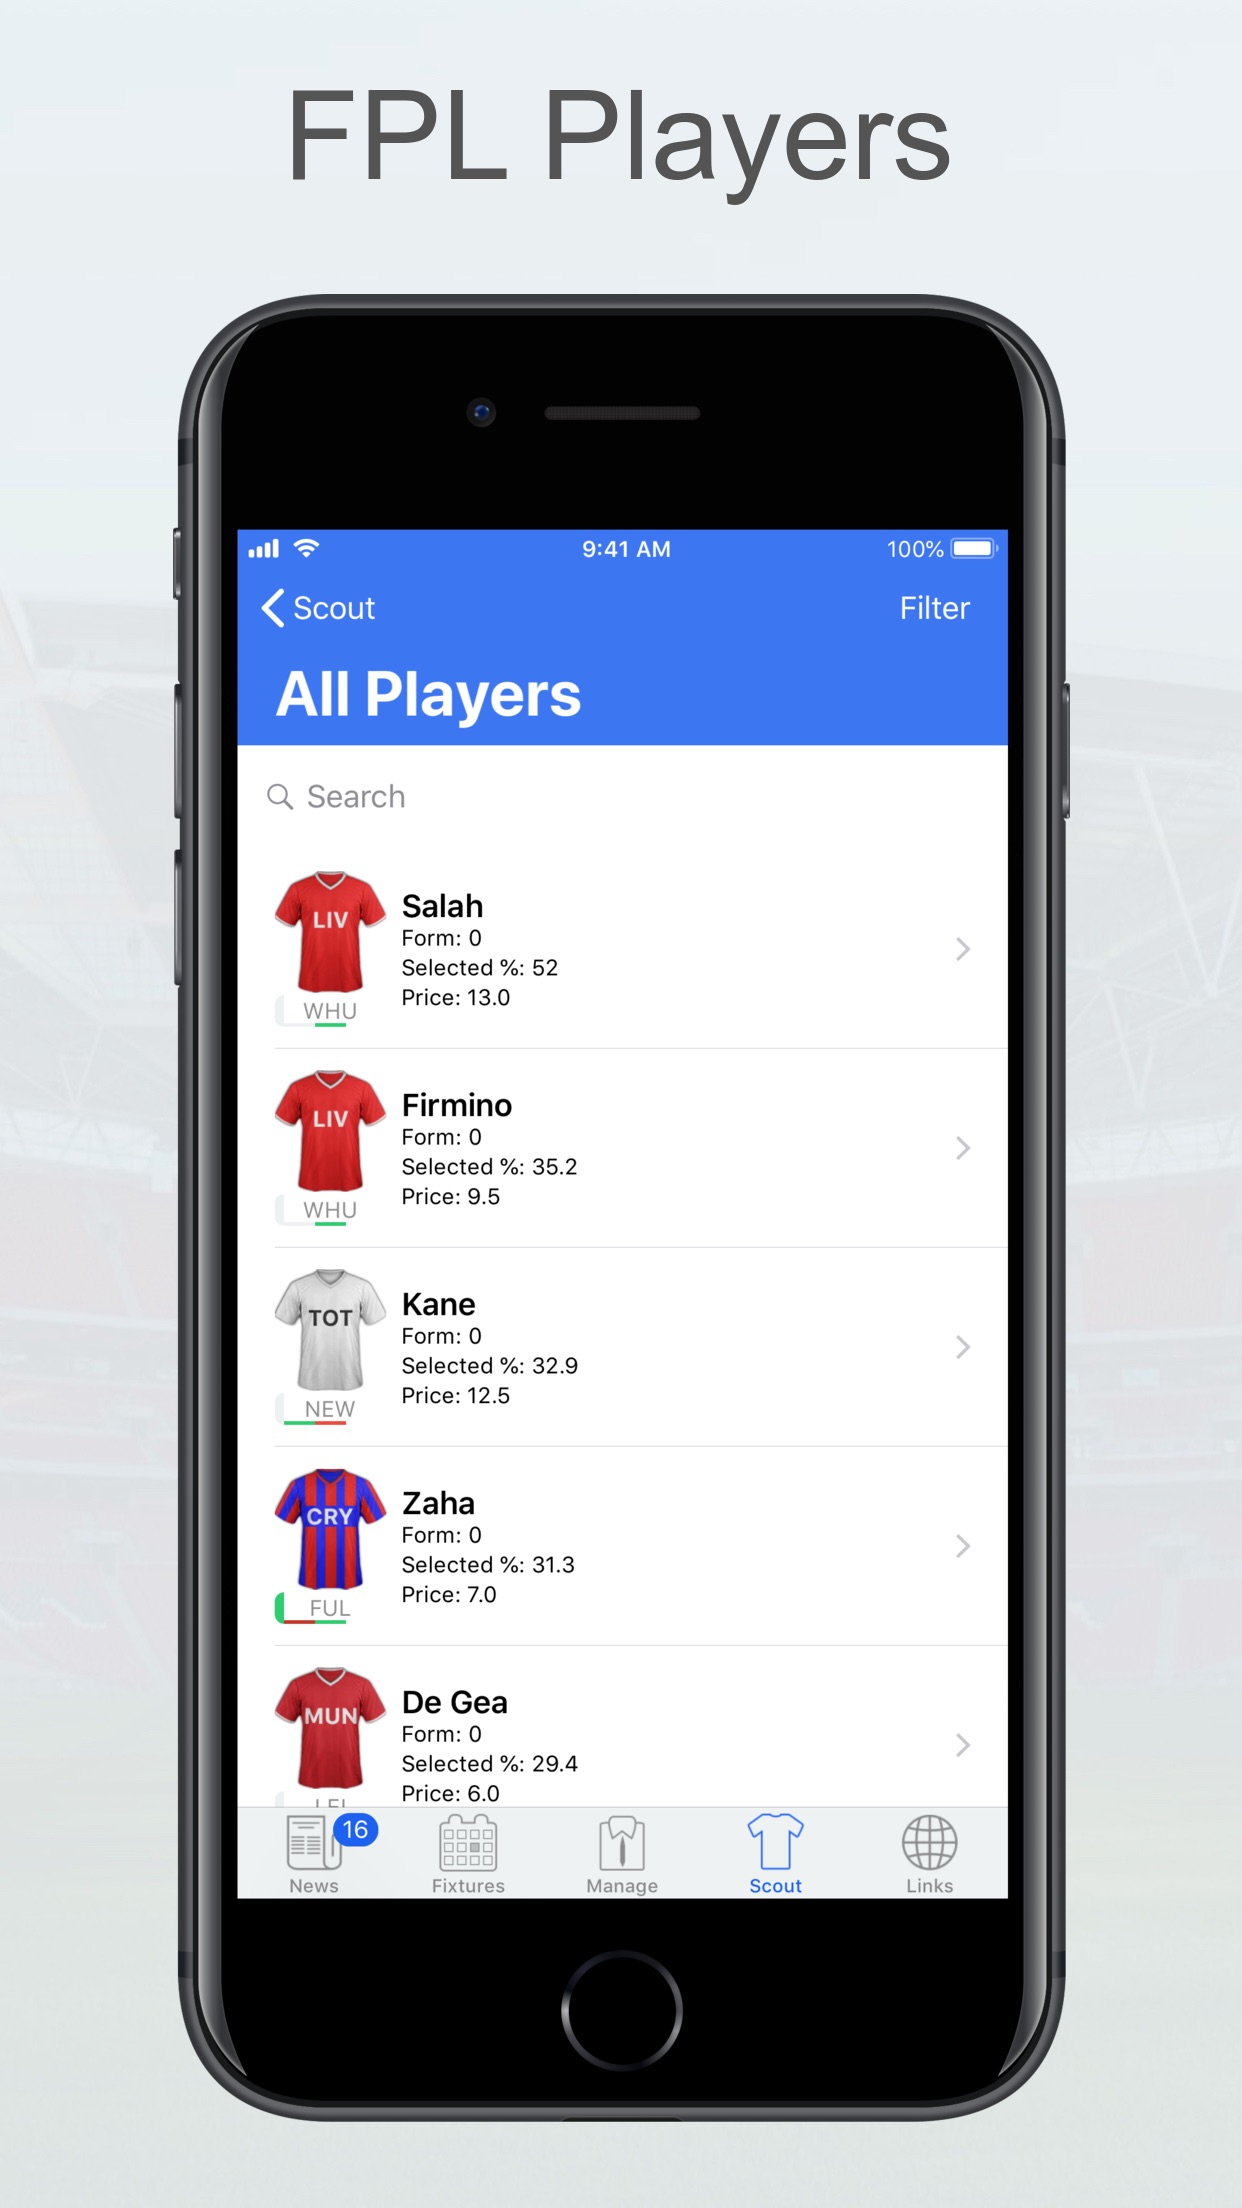 Top Sports Apps for iPhone on the iOS App Store in Nepal · Appfigures